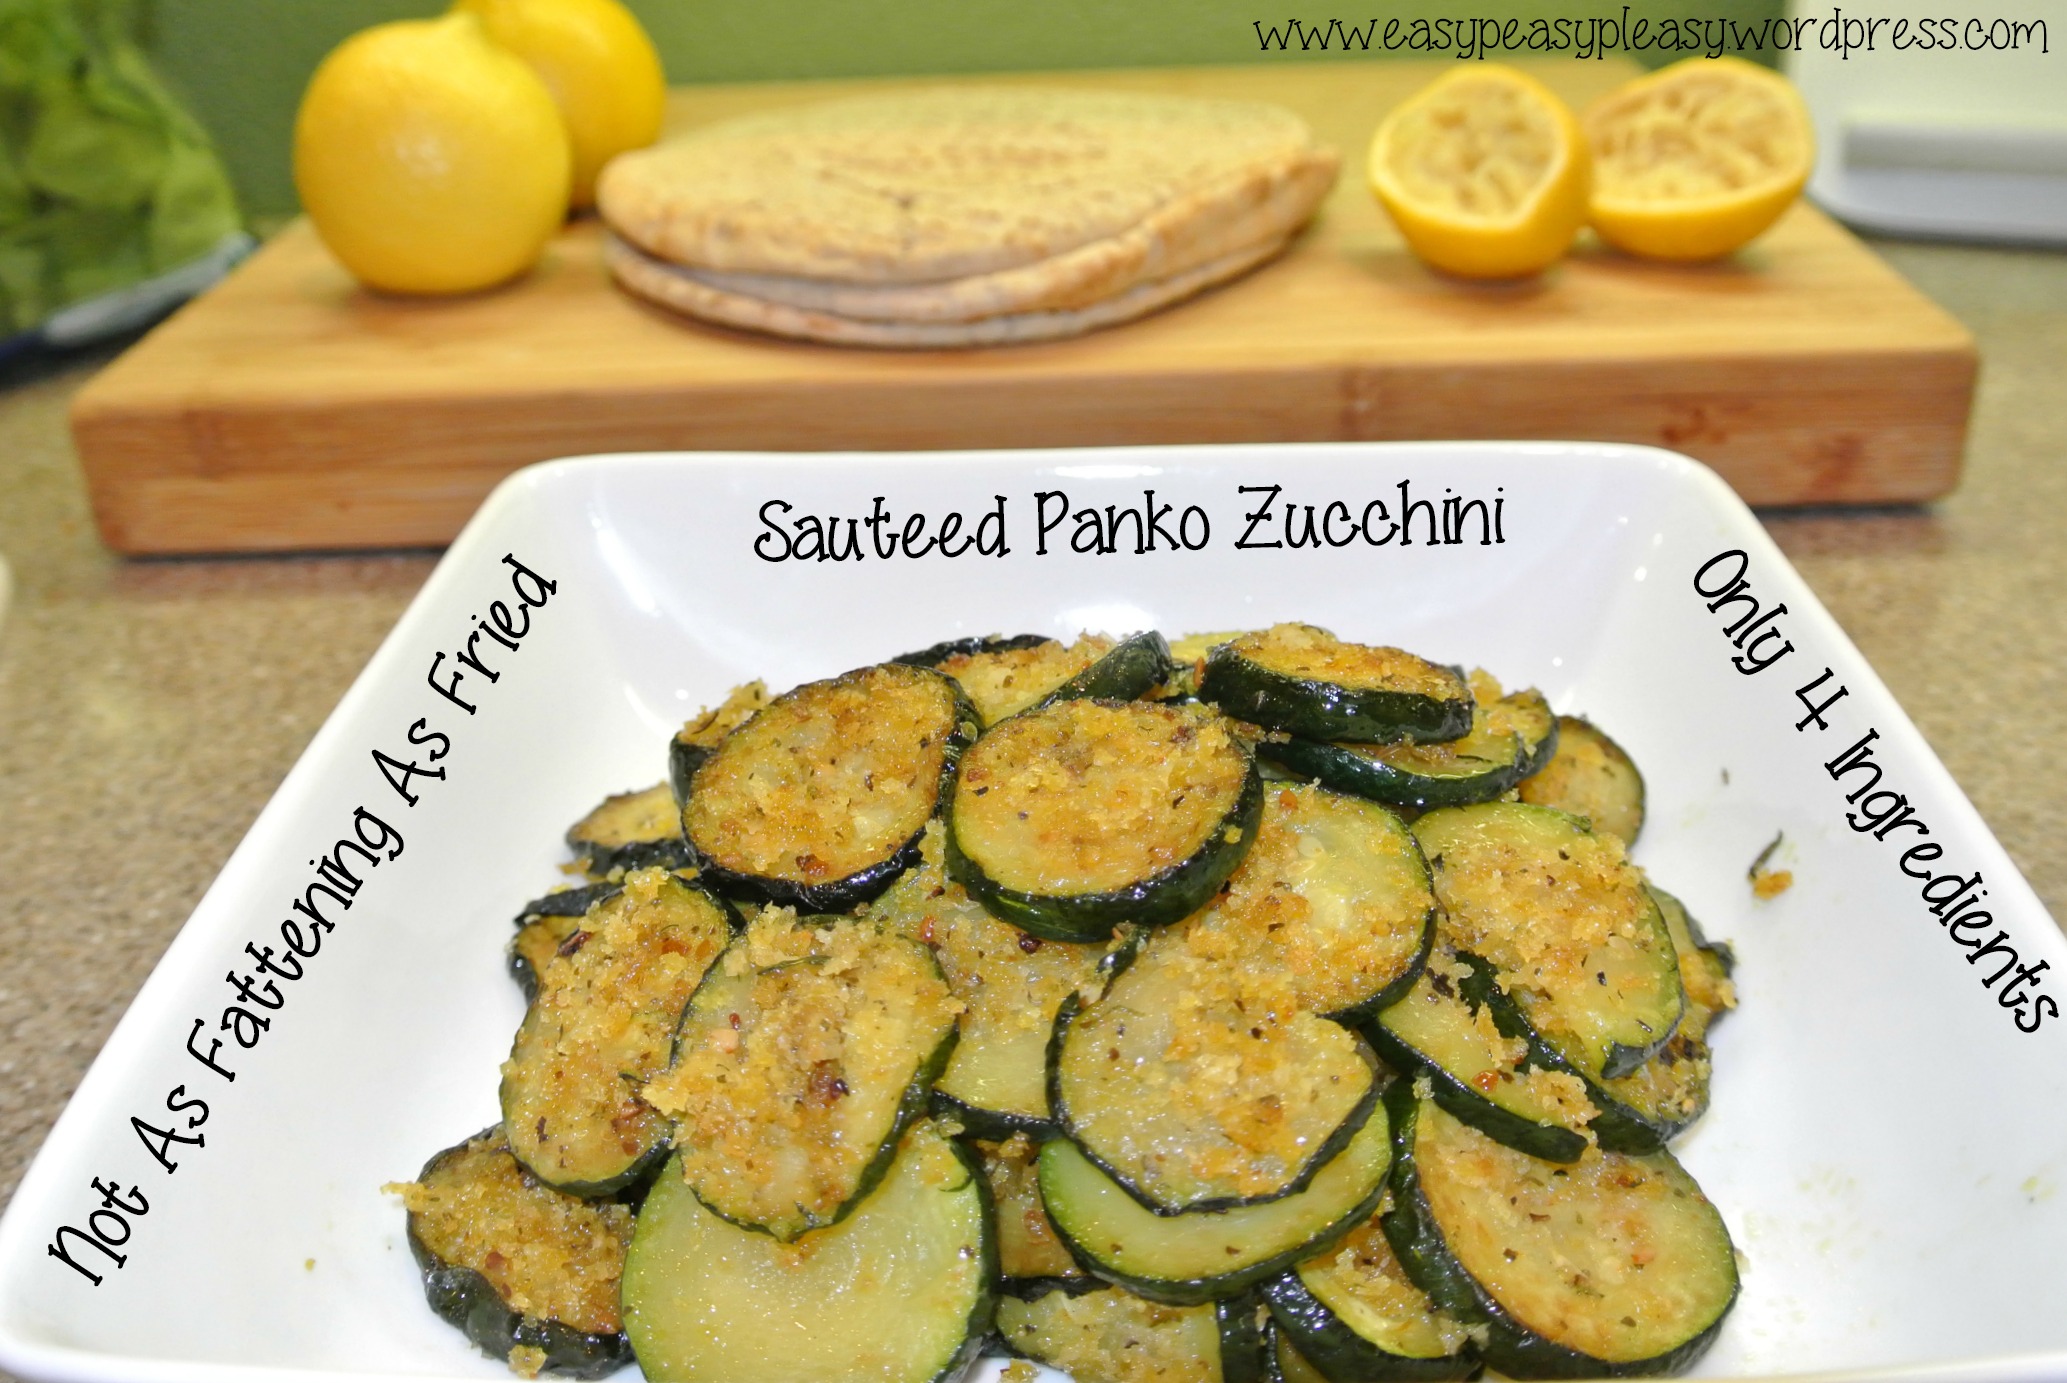 Only 4 Ingredients Not As Fattening As Fried-Sauteed Panko Zucchini